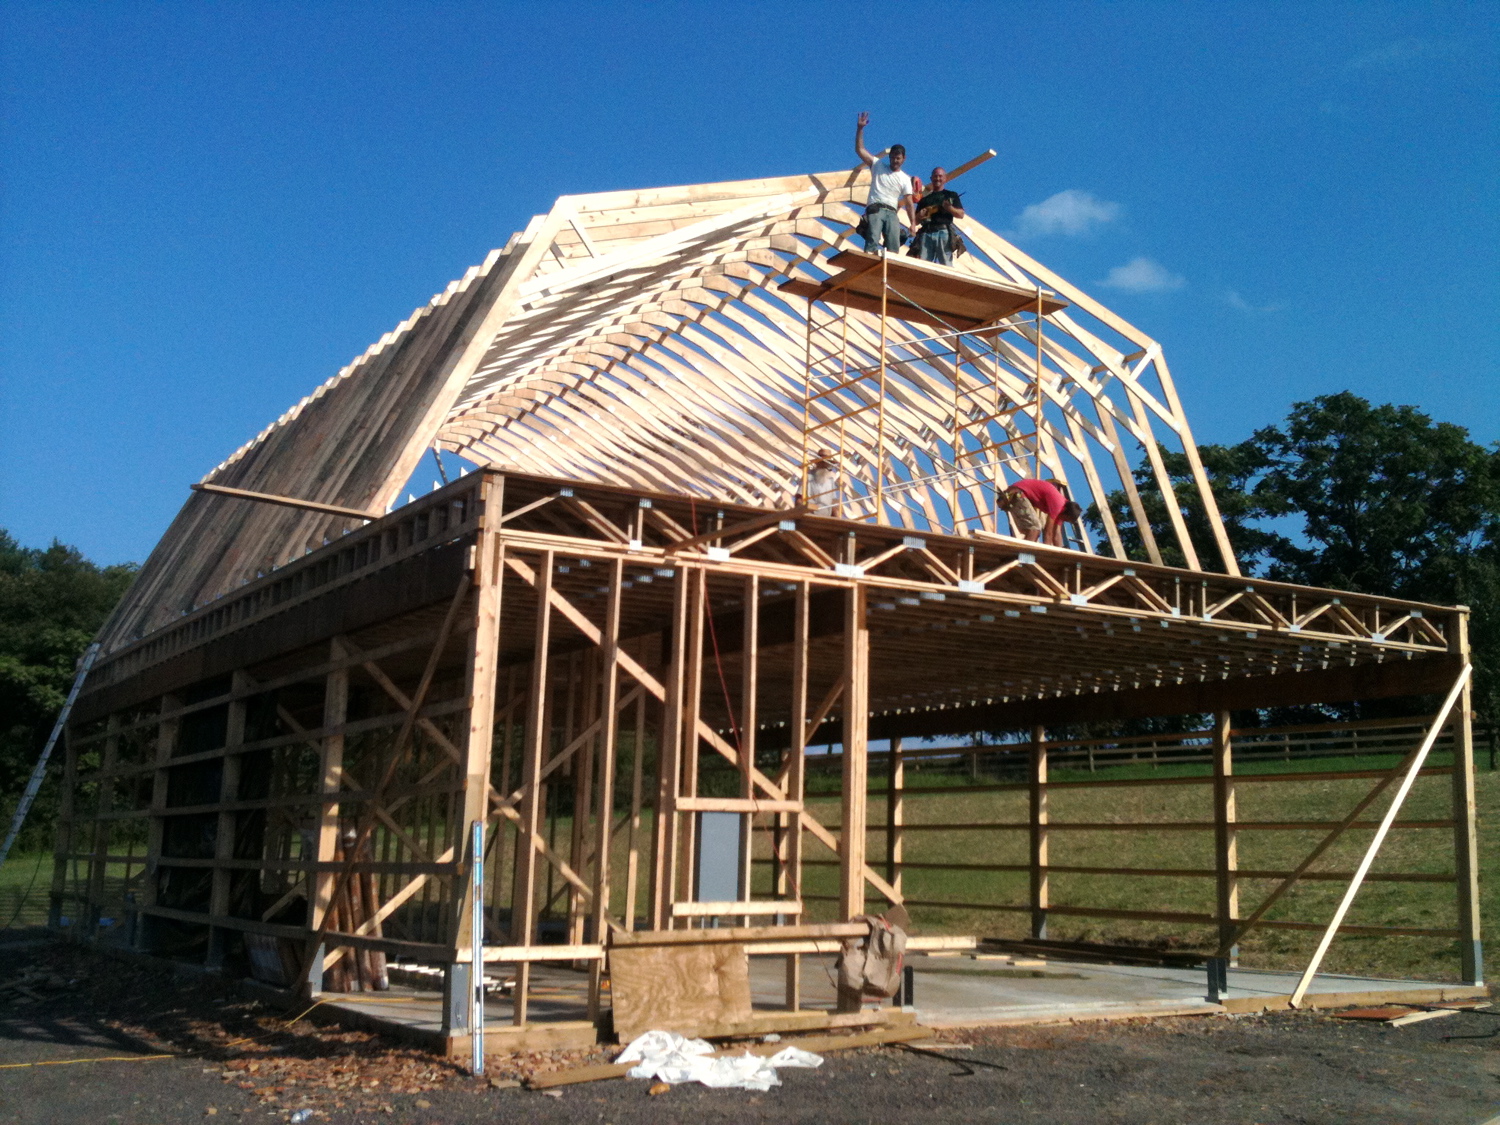 Setting the gambrel rafters